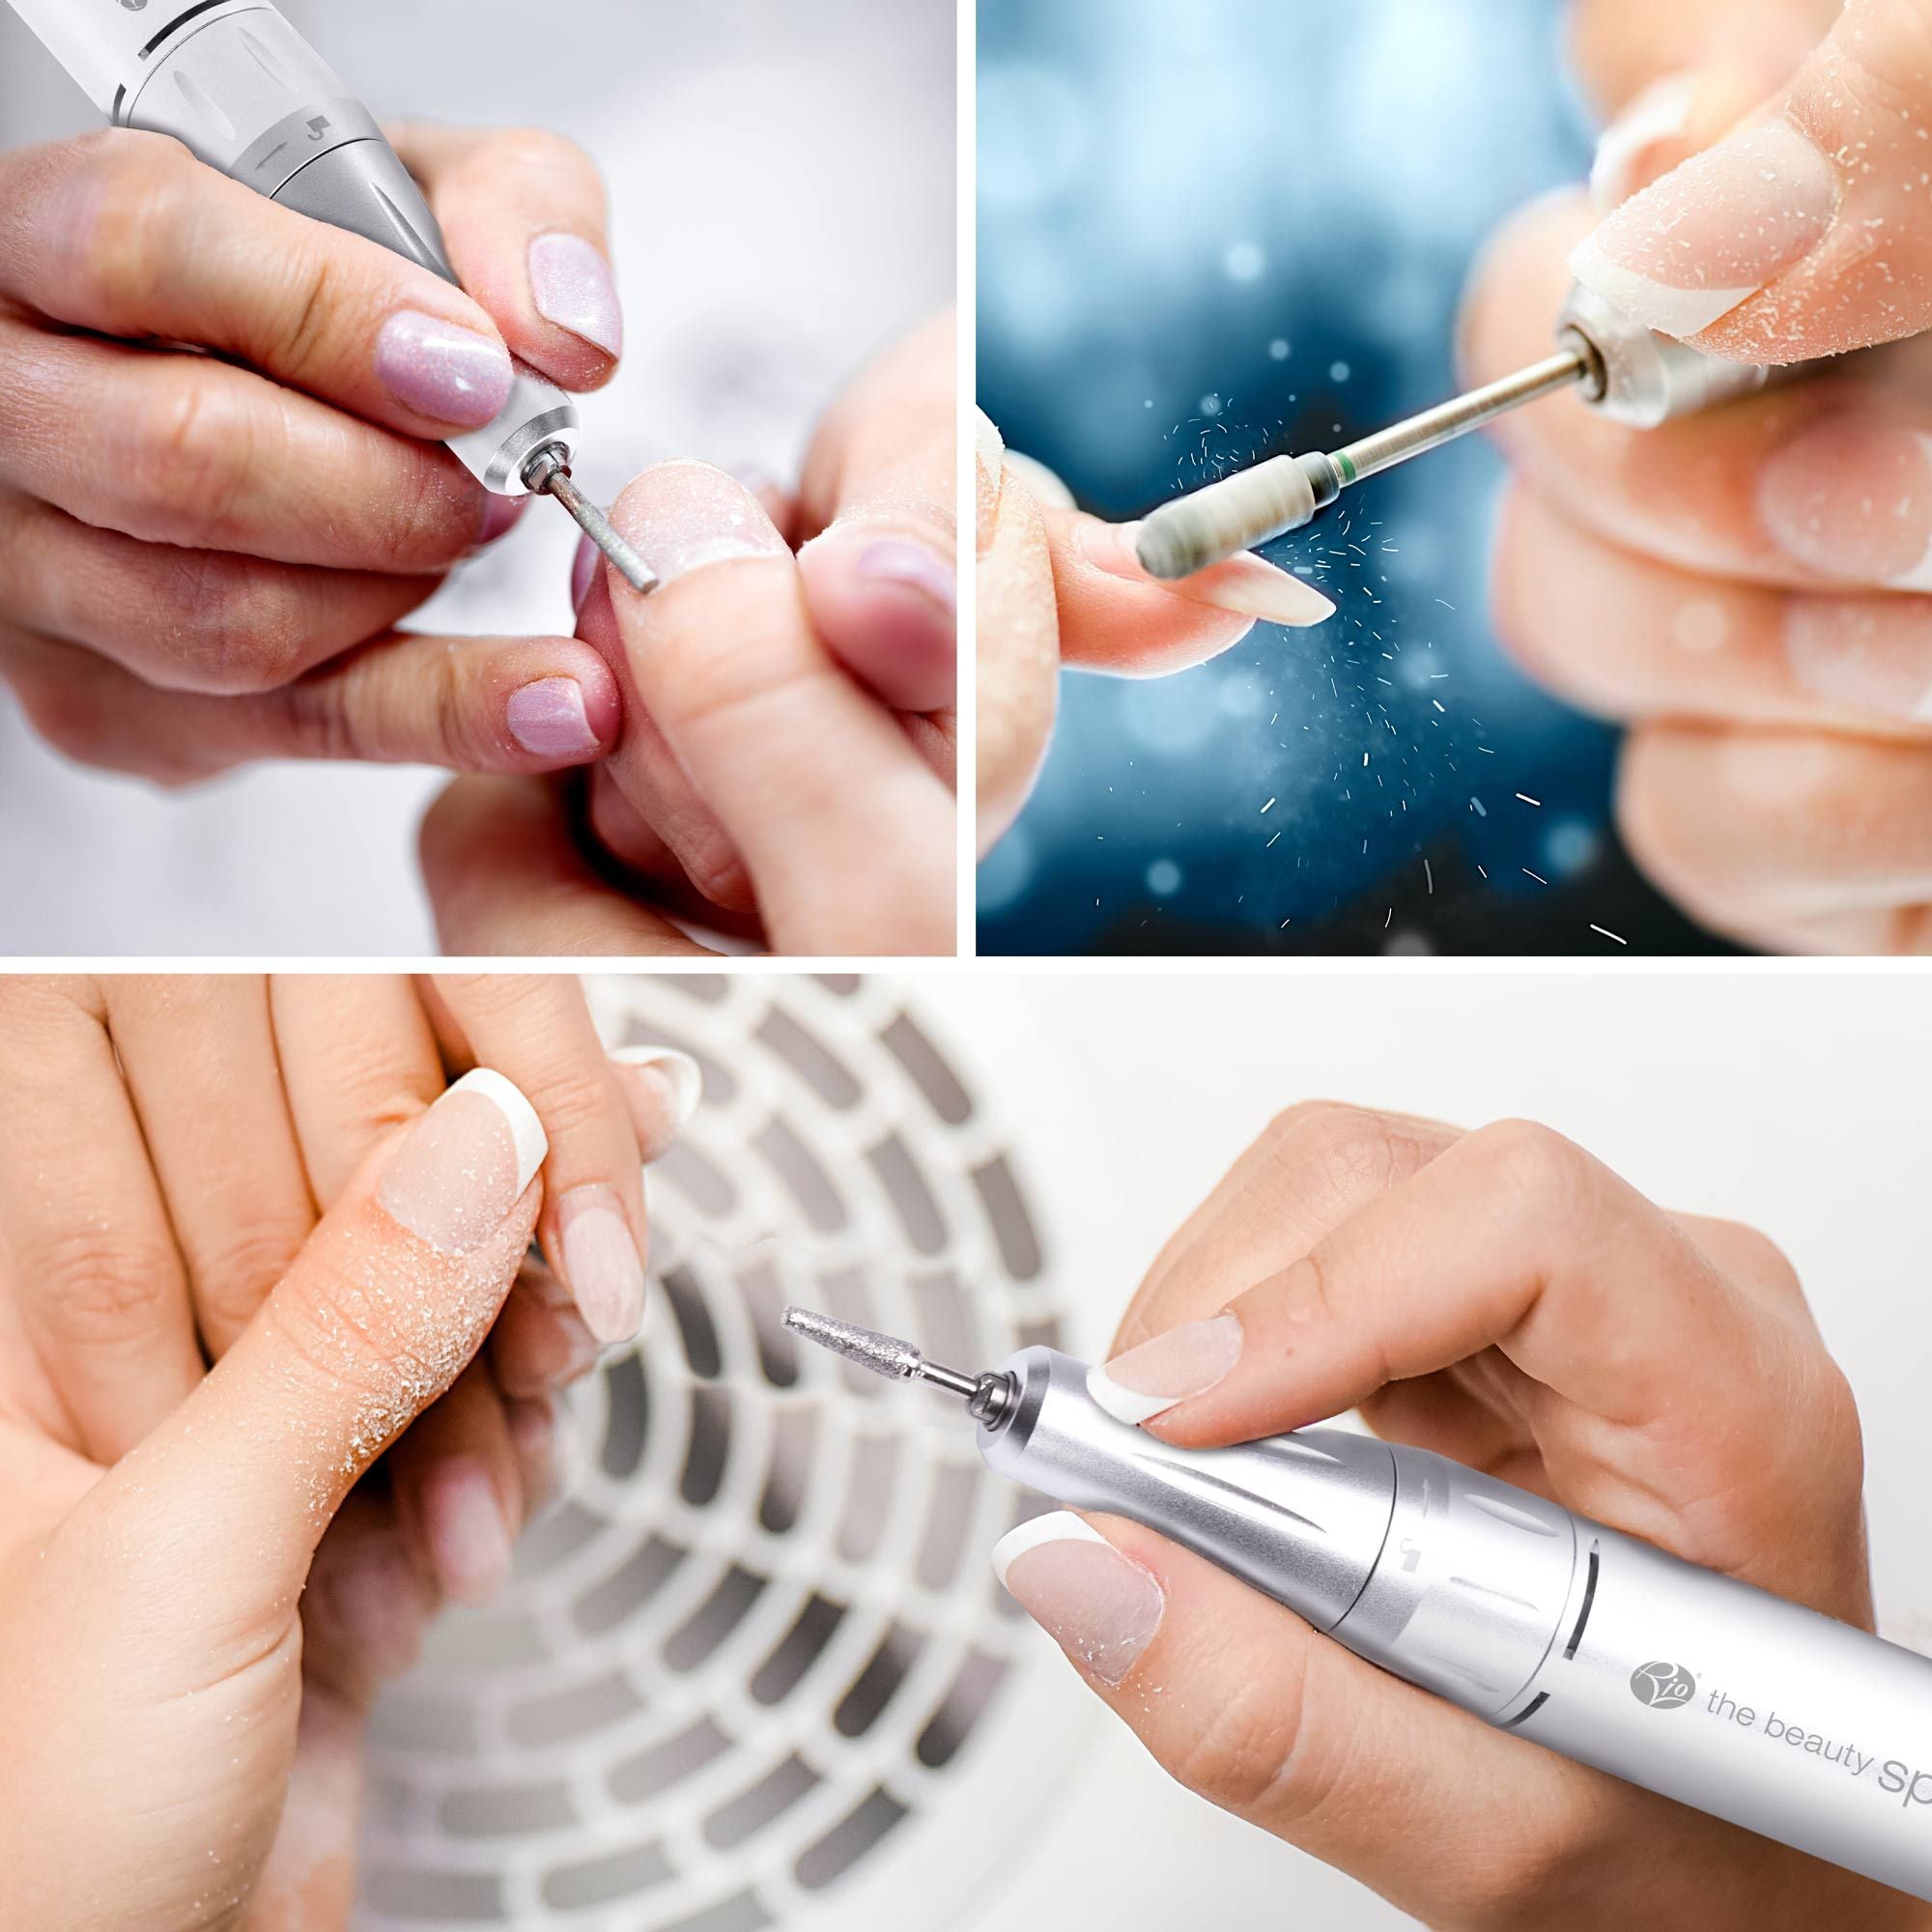 Three images showing electric nail files being used on fingernails, demonstrating their versatility and suitability for both fingernail and toenail care.